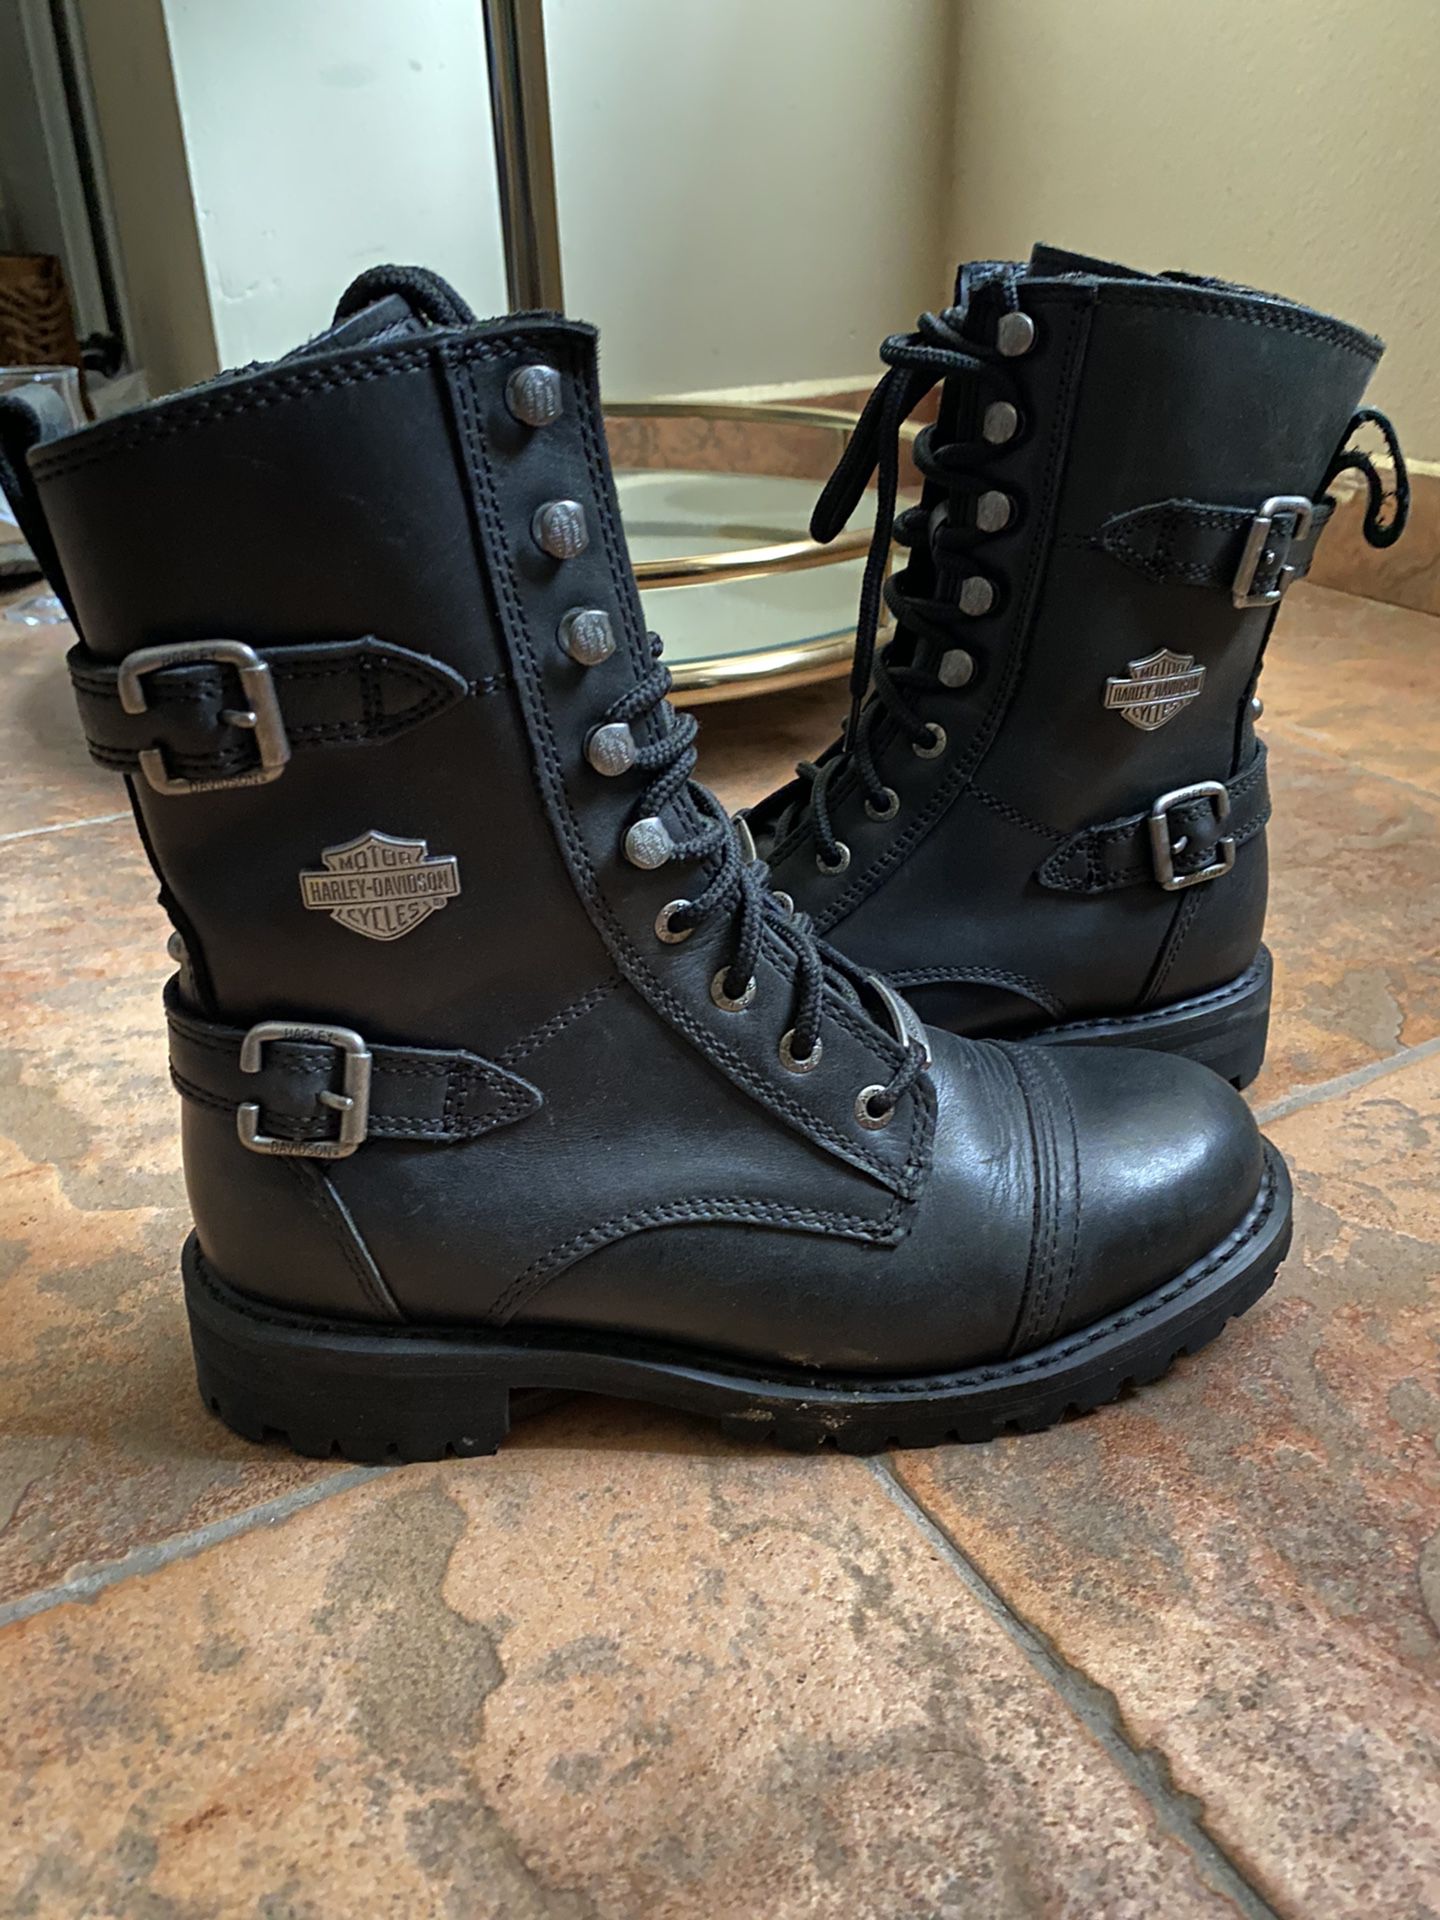 Women’s Harley Davidson Motorcycle Boots